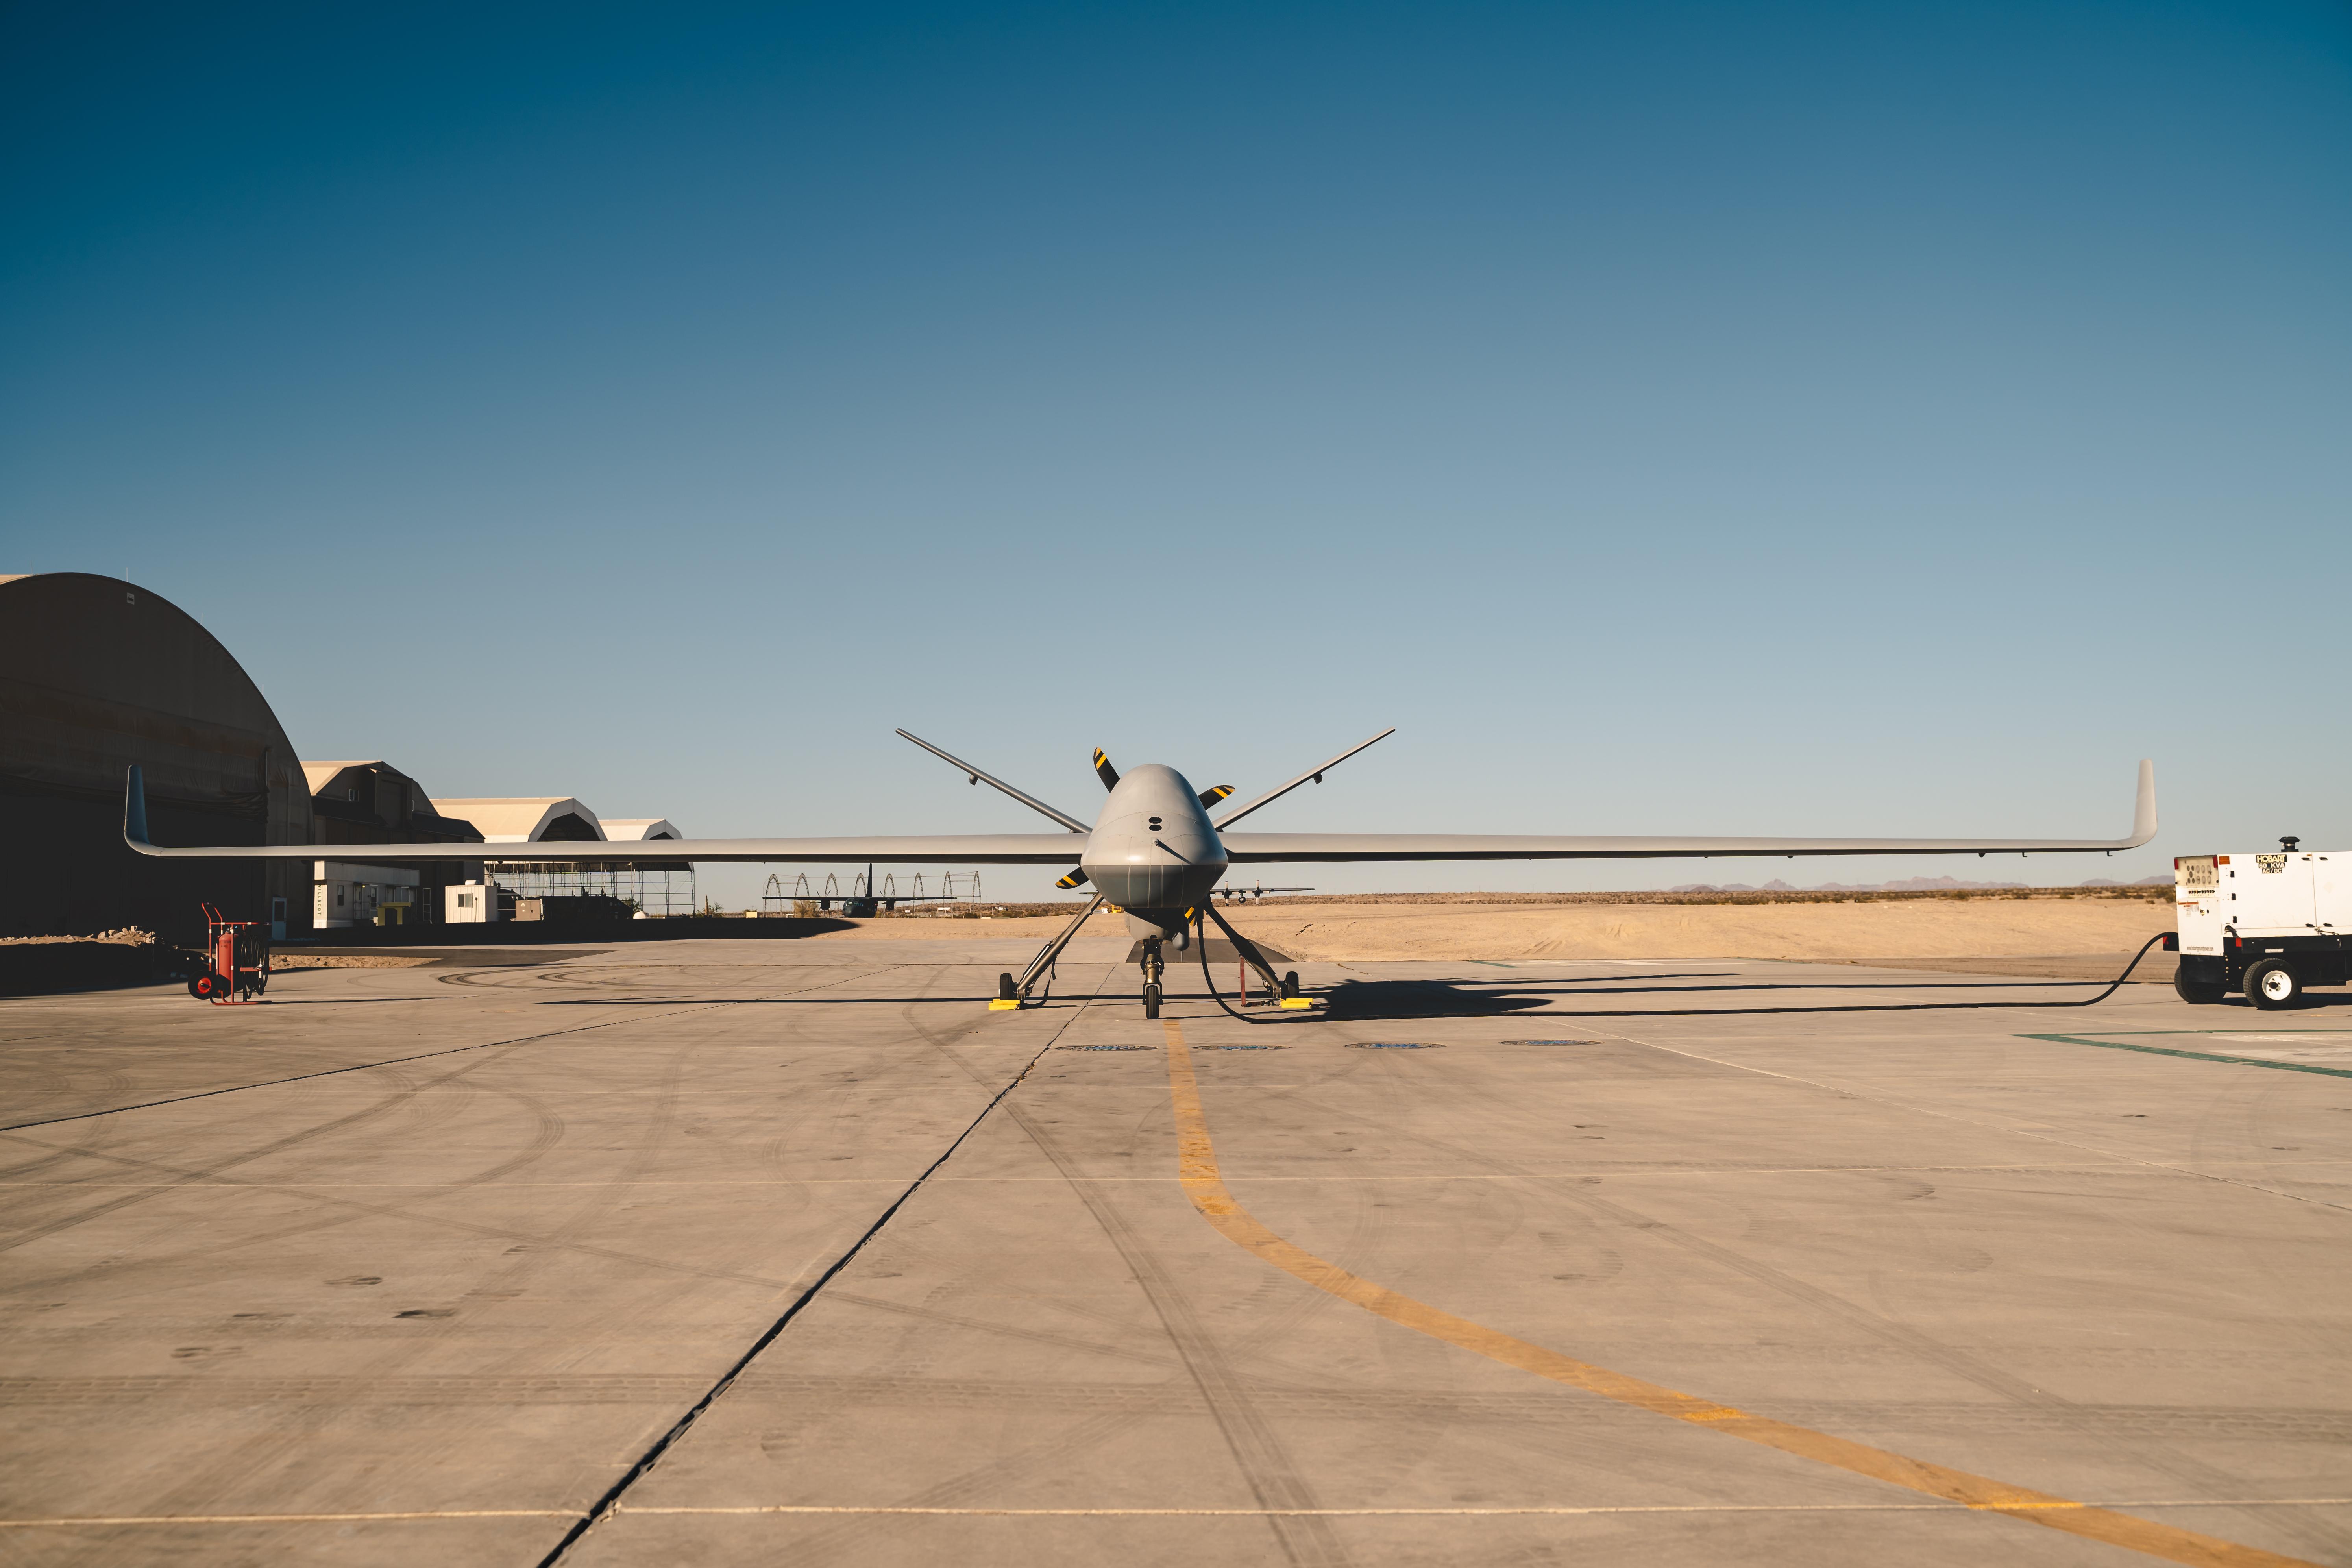 The General Atomics MQ-9B Reaper Unmanned Aerial Vehicle is staged at the U.S. Army Yuma Proving Grounds, U.S. Army Test and Evaluation Command, Yuma, Ariz., Nov. 7, 2019.